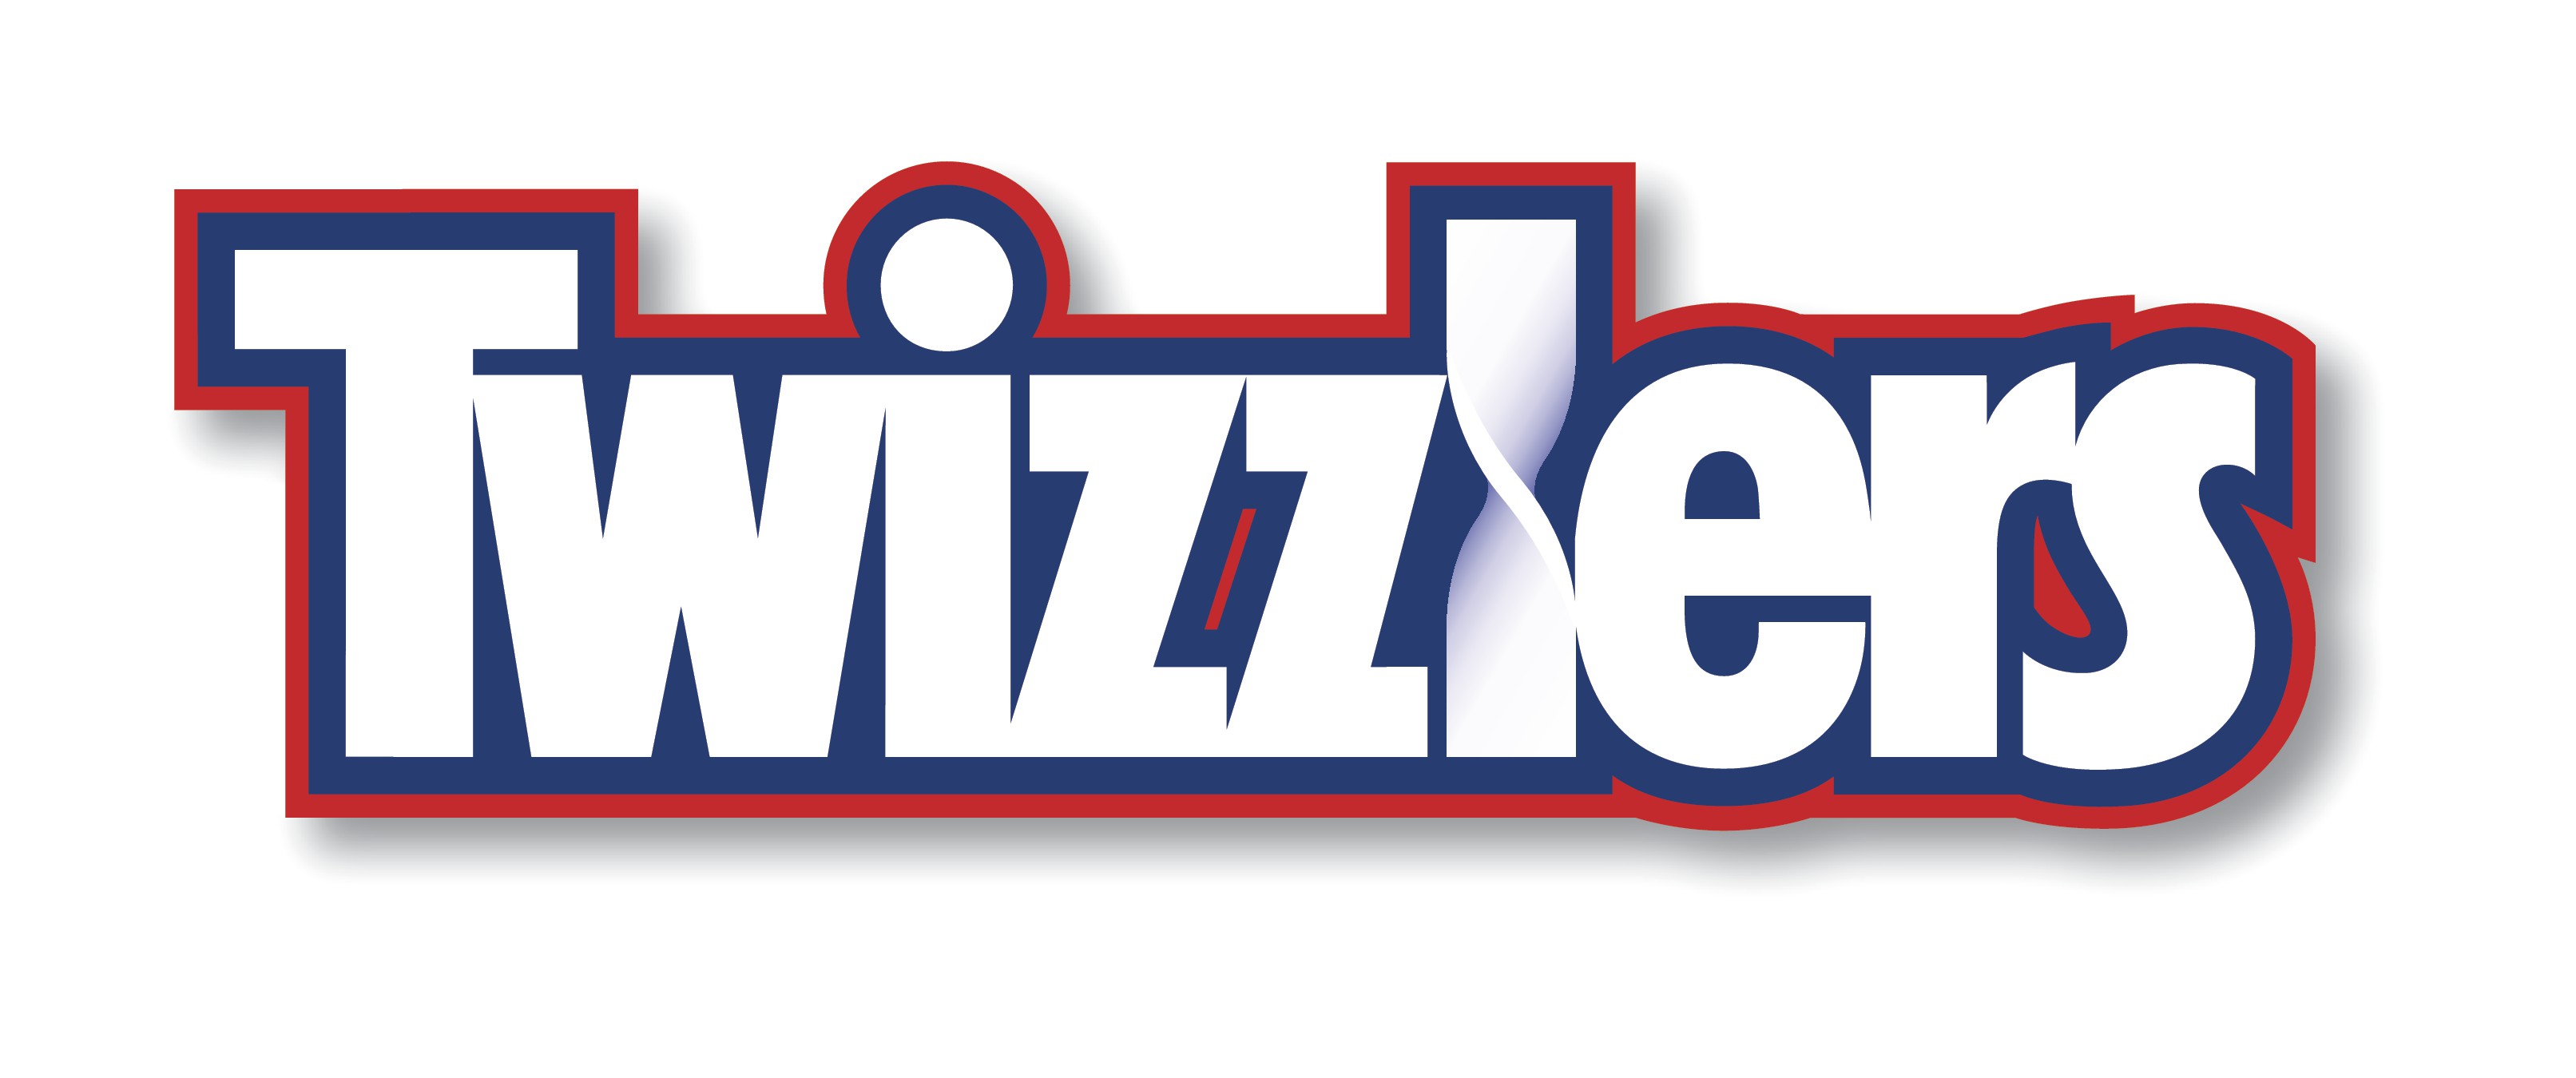 Twizzlers About The Brand